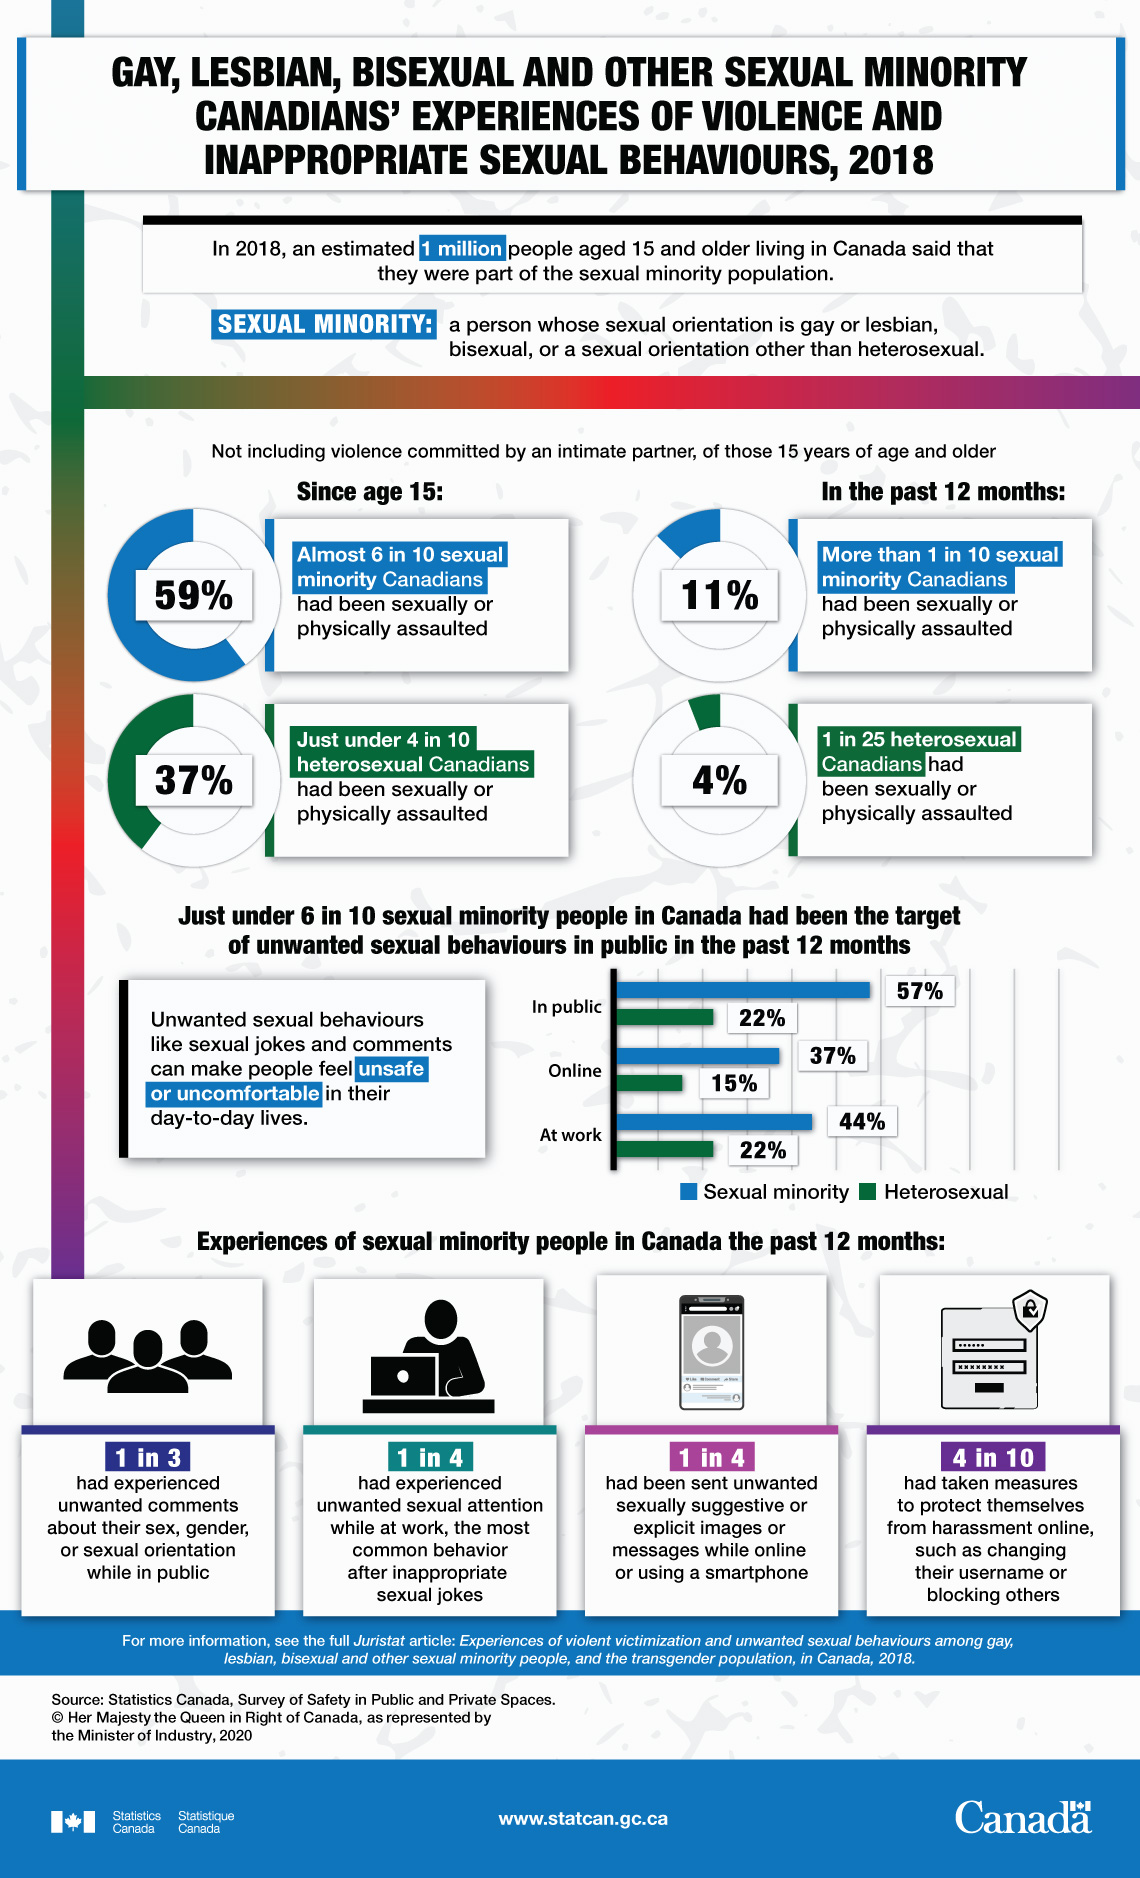 Infographic: Gay, lesbian, bisexual and other sexual minority Canadians’ experiences of violence and inappropriate sexual behaviours, 2018